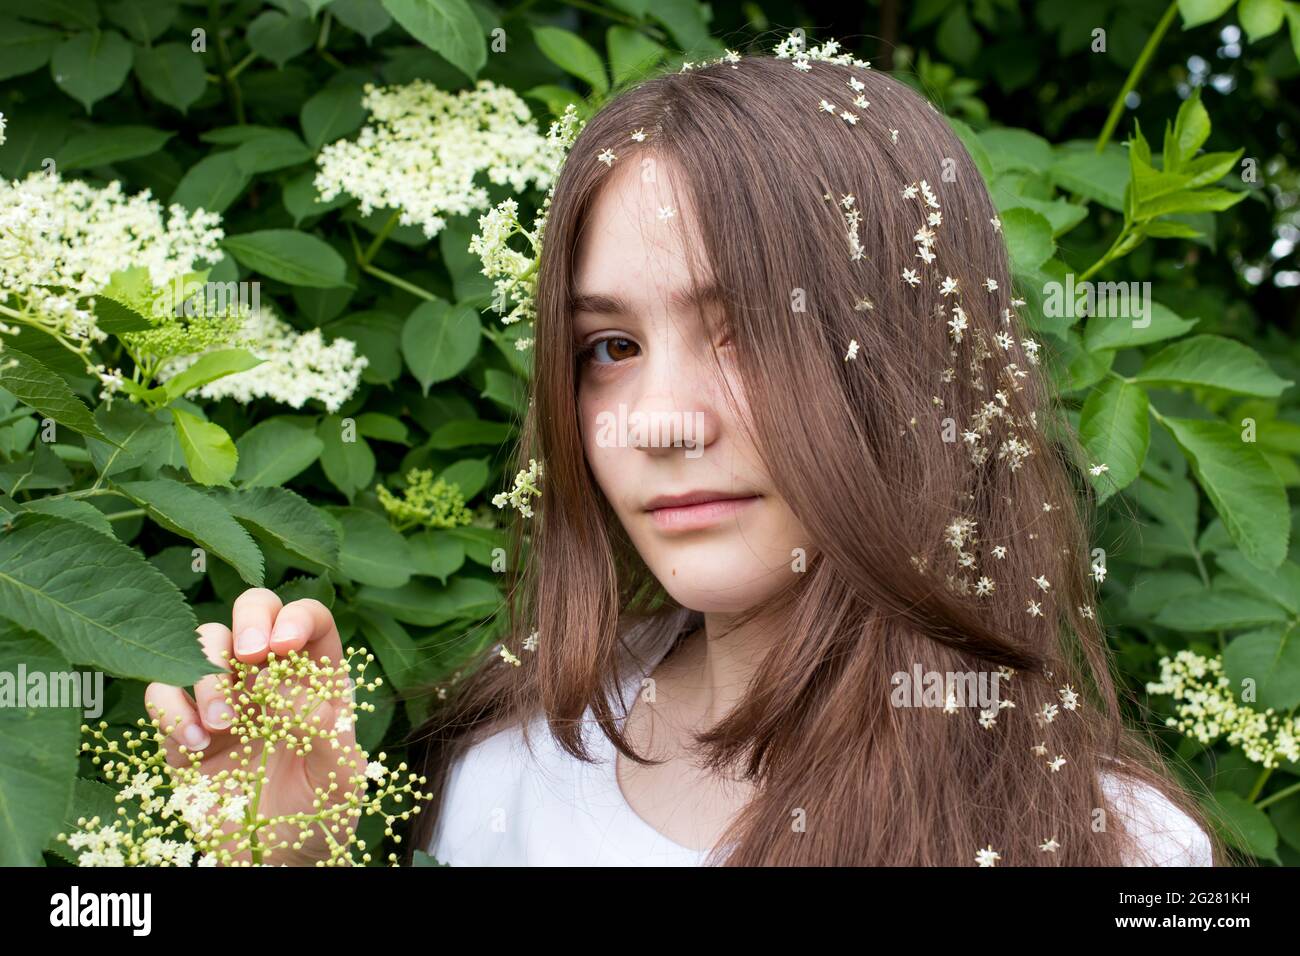 Beautiful girl 13 years old with long hair and an elder tree. Summer bloom in June, human unity with nature or natural hair care with plants. Stock Photo